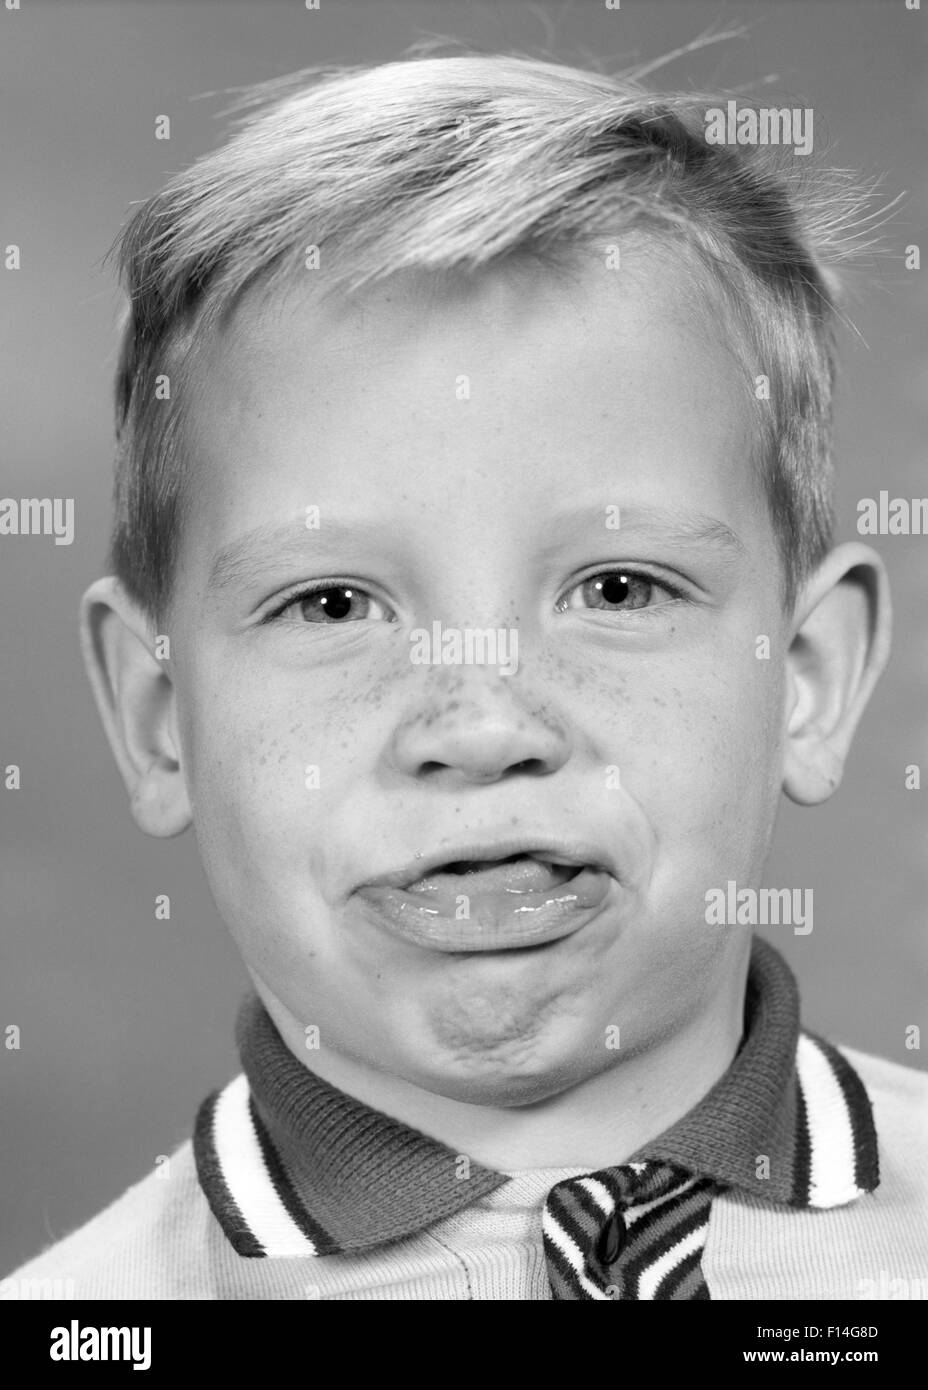 1960 LITTLE BOY STICKING OUT TONGUE LOOKING AT CAMERA DONNANT BRONX CHEER HUÉE CHAHUT railleries de framboise Banque D'Images